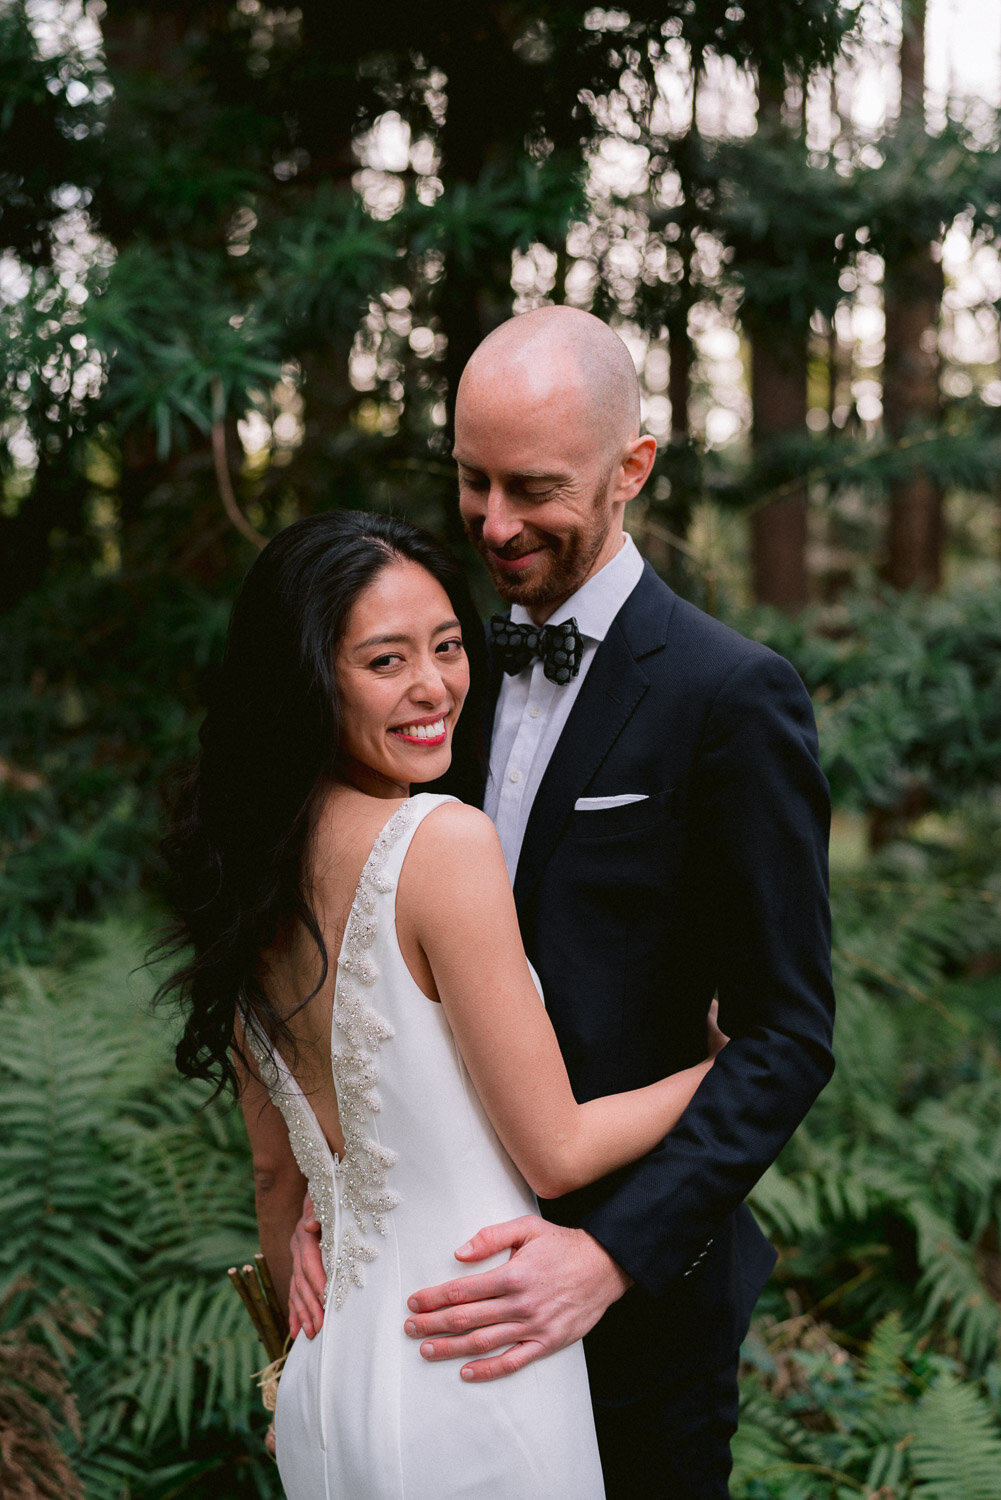 Natural and Candid Wedding Portrait in Tokyo, Japan